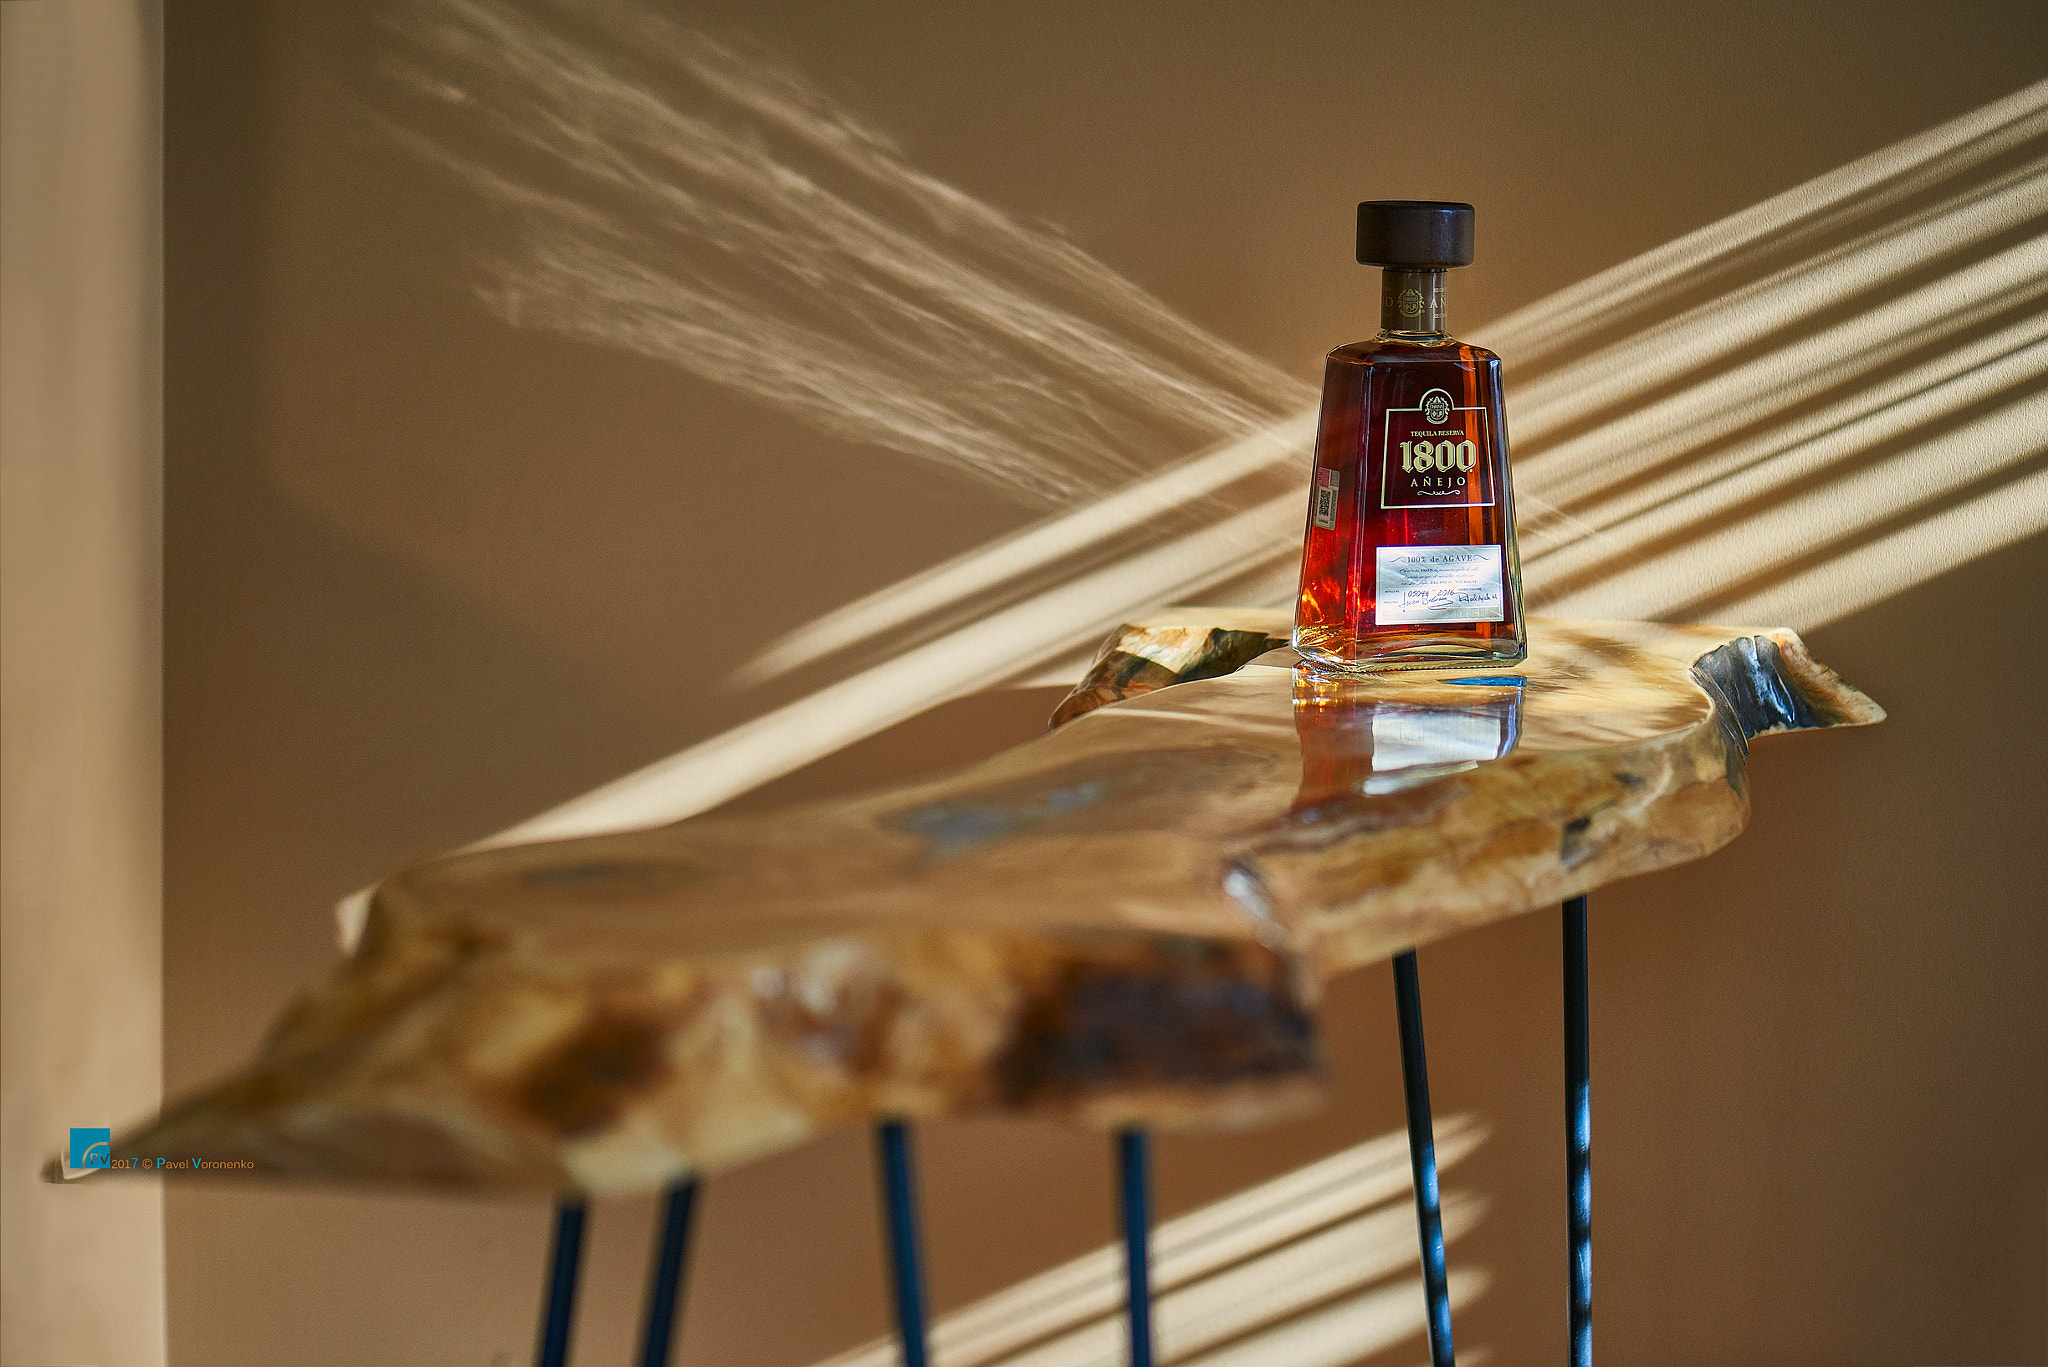 Nikon D810 sample photo. Sense of synergy between wood, sunlight & tequila photography